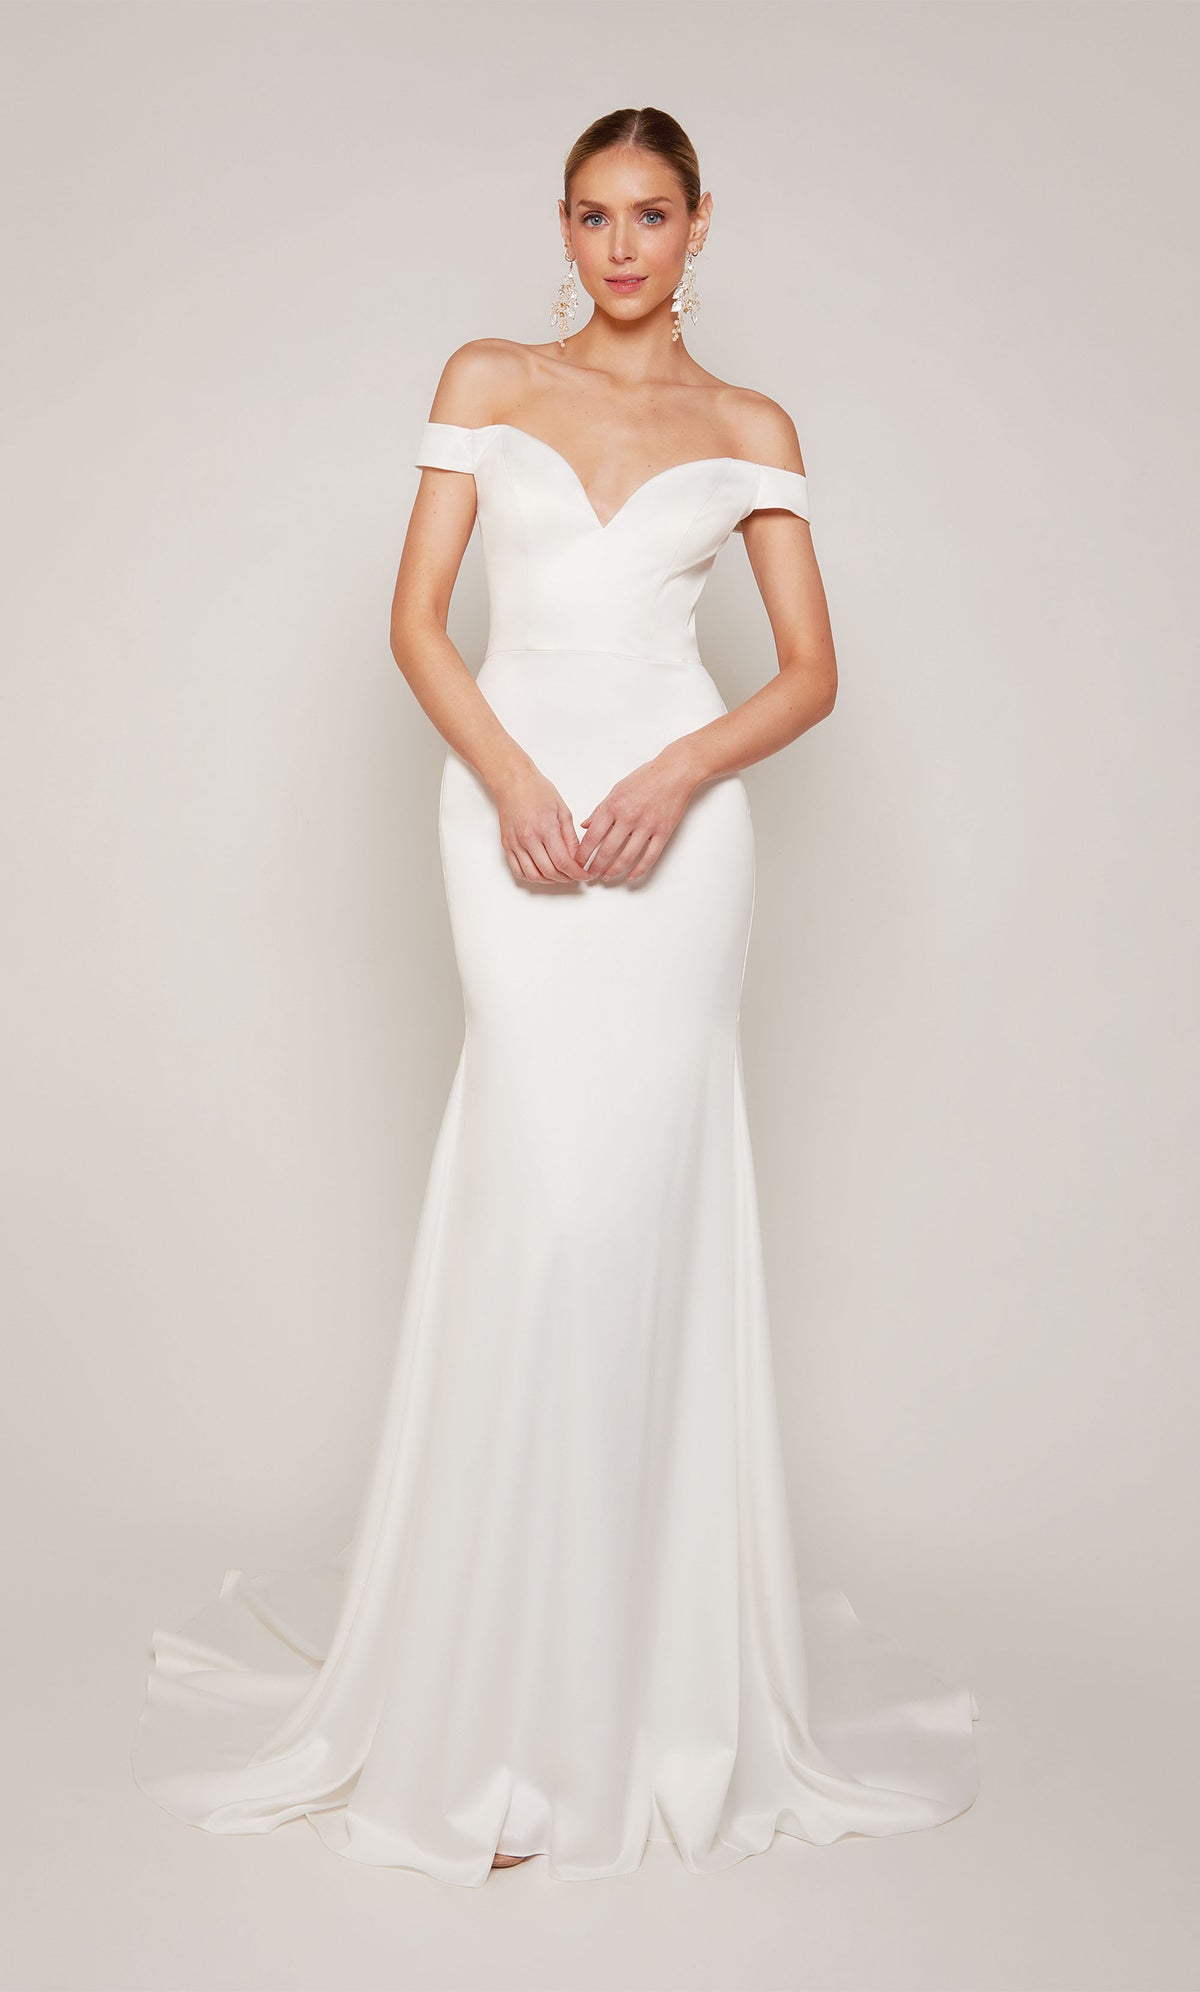 A sophisticated, off-the-shoulder satin wedding dress with a detachable train and satin-covered buttons 